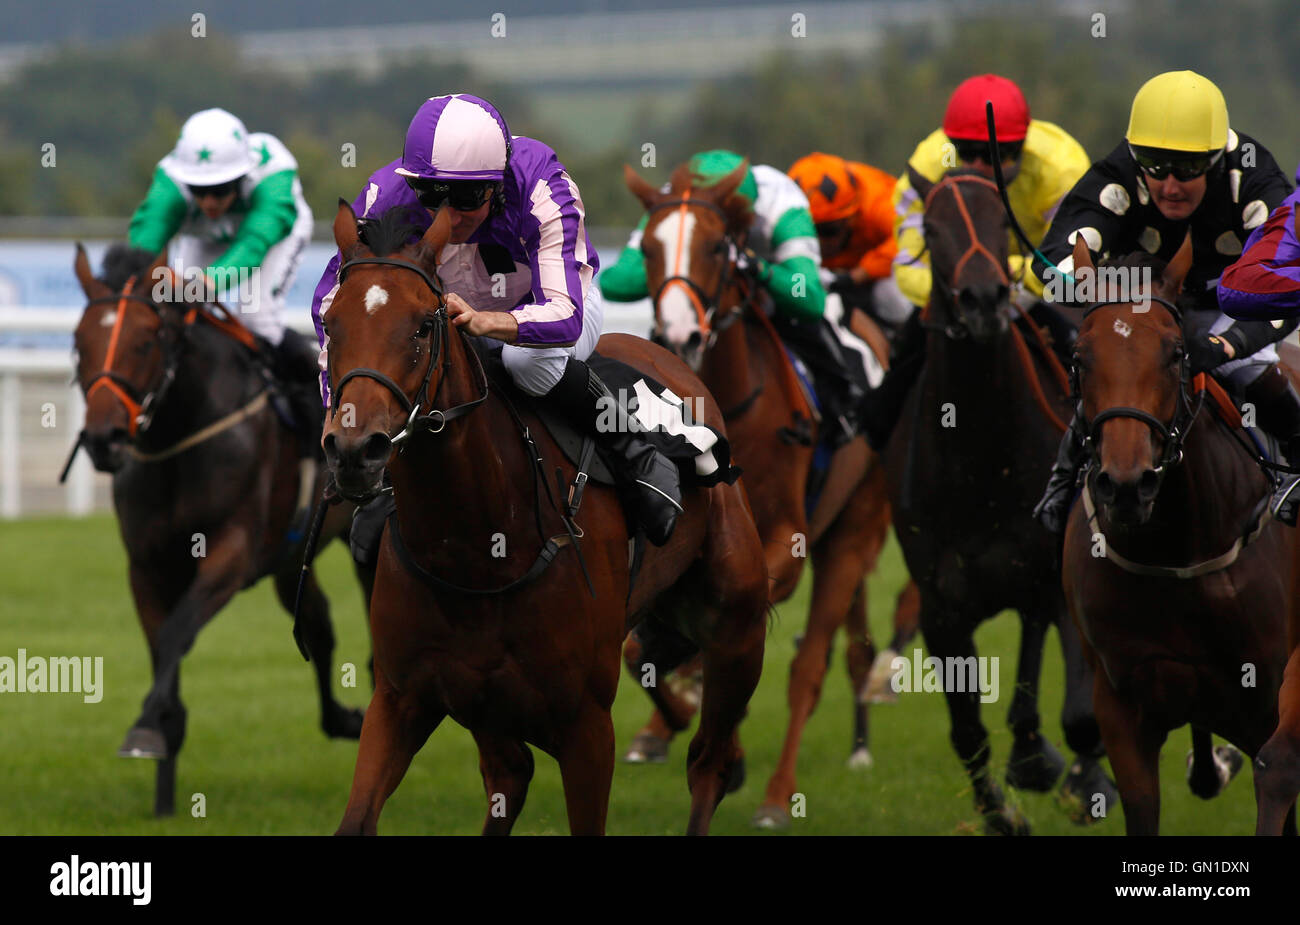 Tara Celeb (centre) ridden by John Egan leads the field home to win The Absoloute Aesthetics Maiden Fillies' Stakes Race run at Goodwood Racecourse. Stock Photo